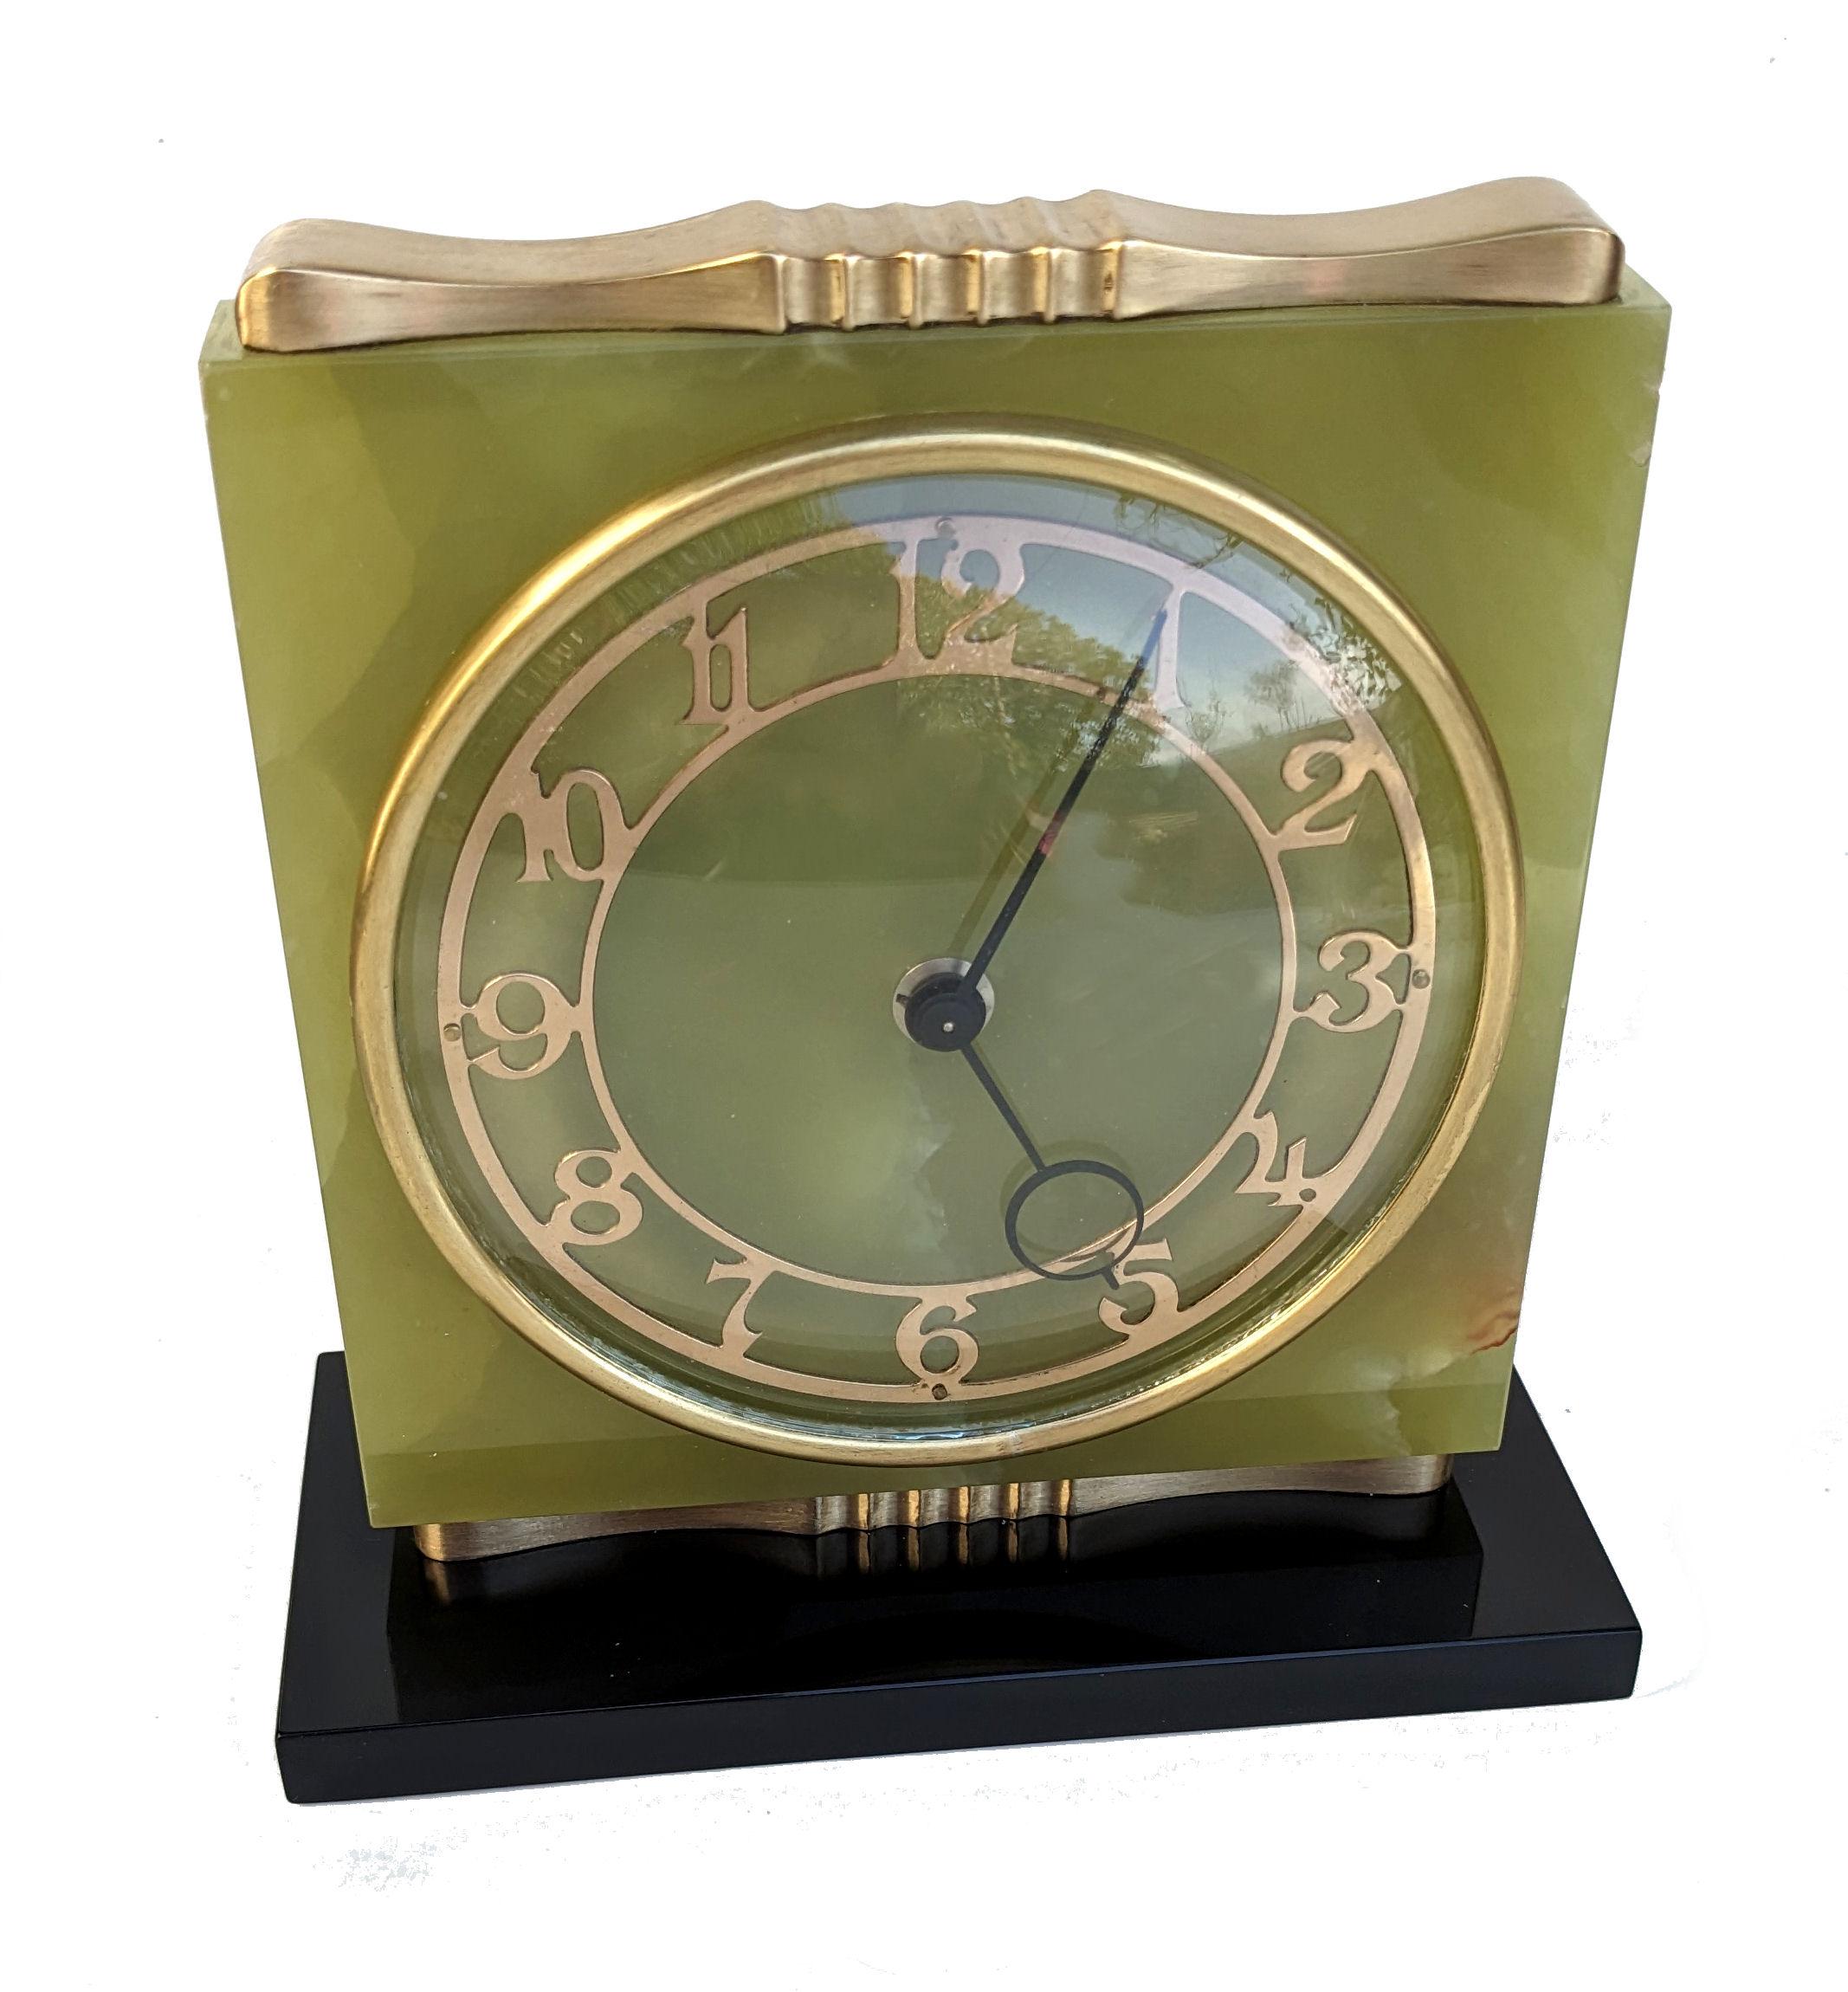 For your consideration is this lovely English Art Deco mantle clock, dating to the 1930's and newly serviced. Images taken outside in natural daylight so you get a true colour representation. The green onyx colouring is a gorgeous leafy green which